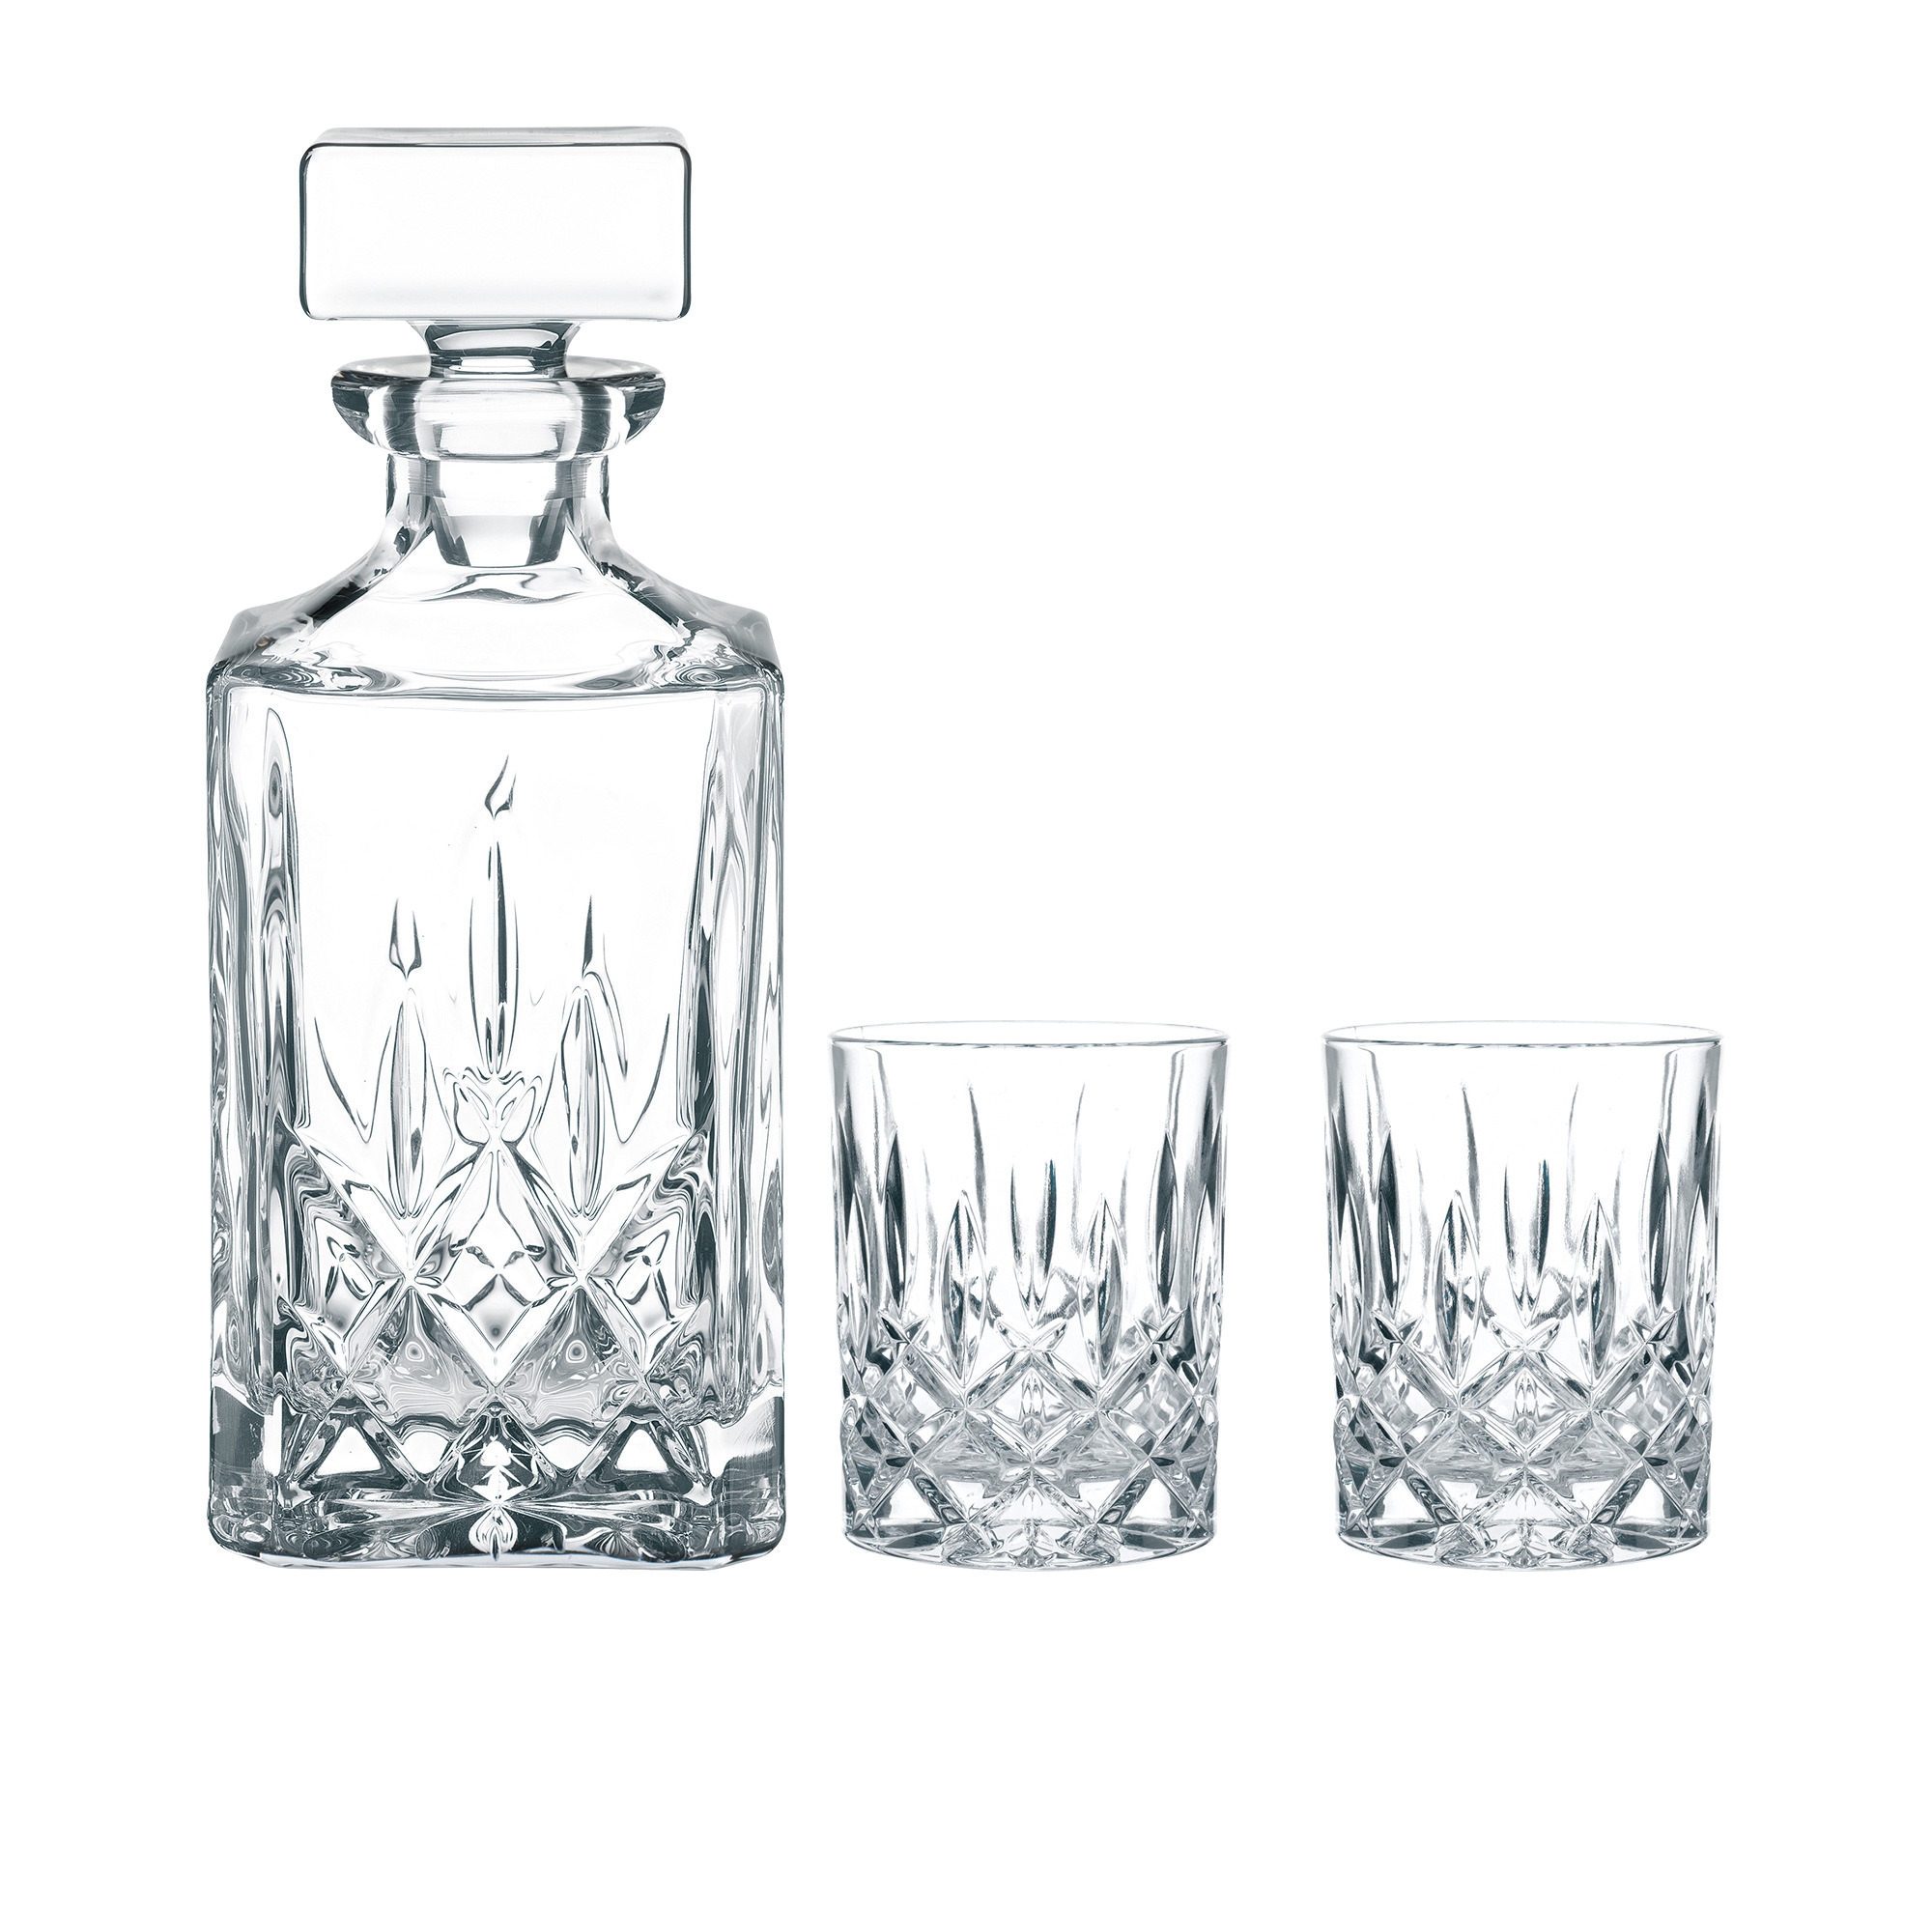 Nachtmann Noblesse Decanter and Tumbler Set 3pc Image 1